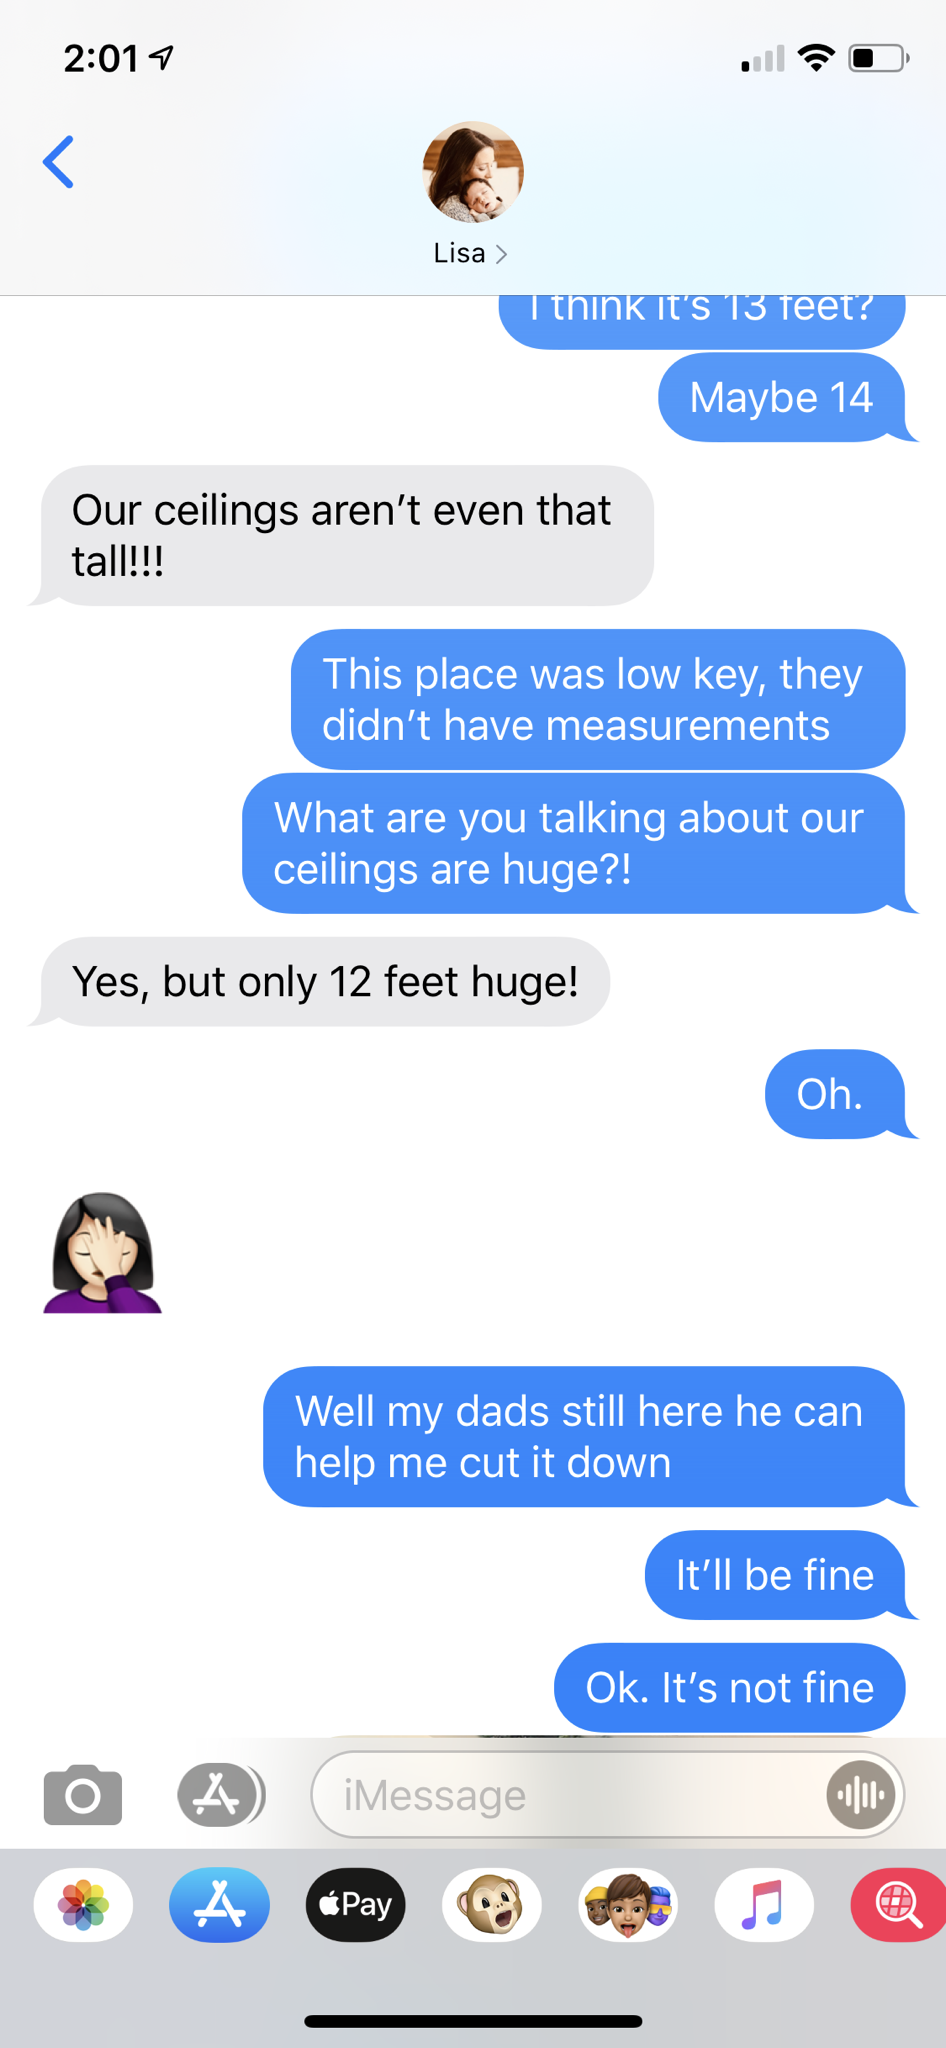 thank you for shopping shipt - 1 Khs 13 Teer Maybe 14 Our ceilings aren't even that tall!!! This place was low key, they didn't have measurements What are you talking about our ceilings are huge?! Yes, but only 12 feet huge! Oh. Well my dads still here he